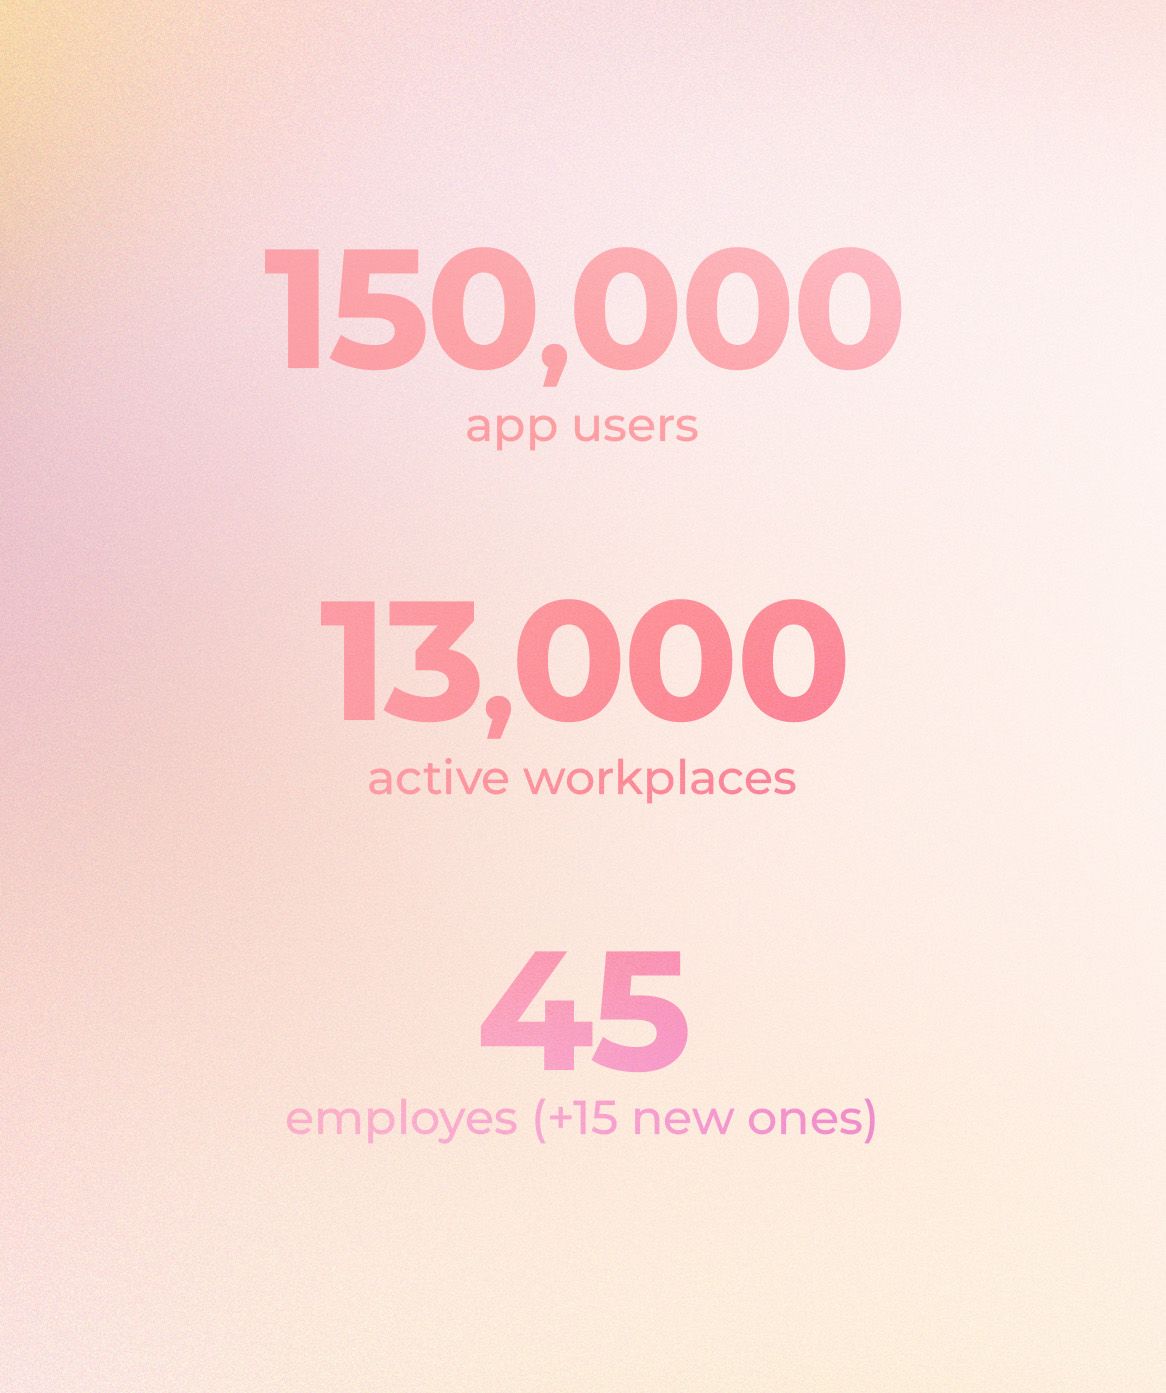 Infography showing number of app users, number of active workplaces and number of employees at Agendrix